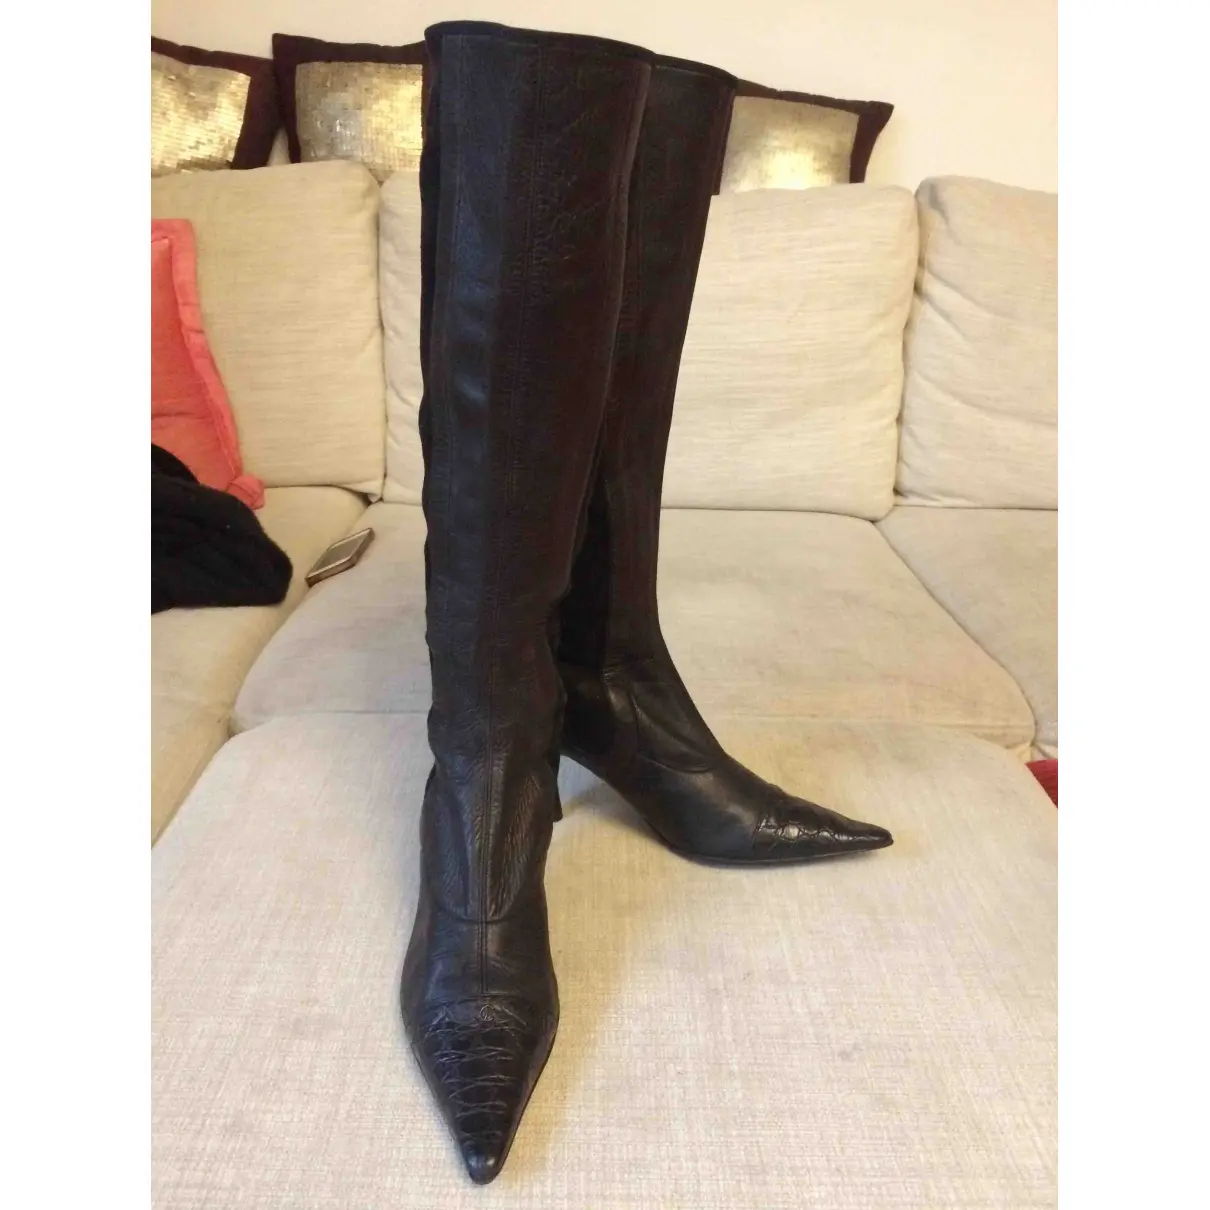 Buy Chanel Leather boots online - Vintage